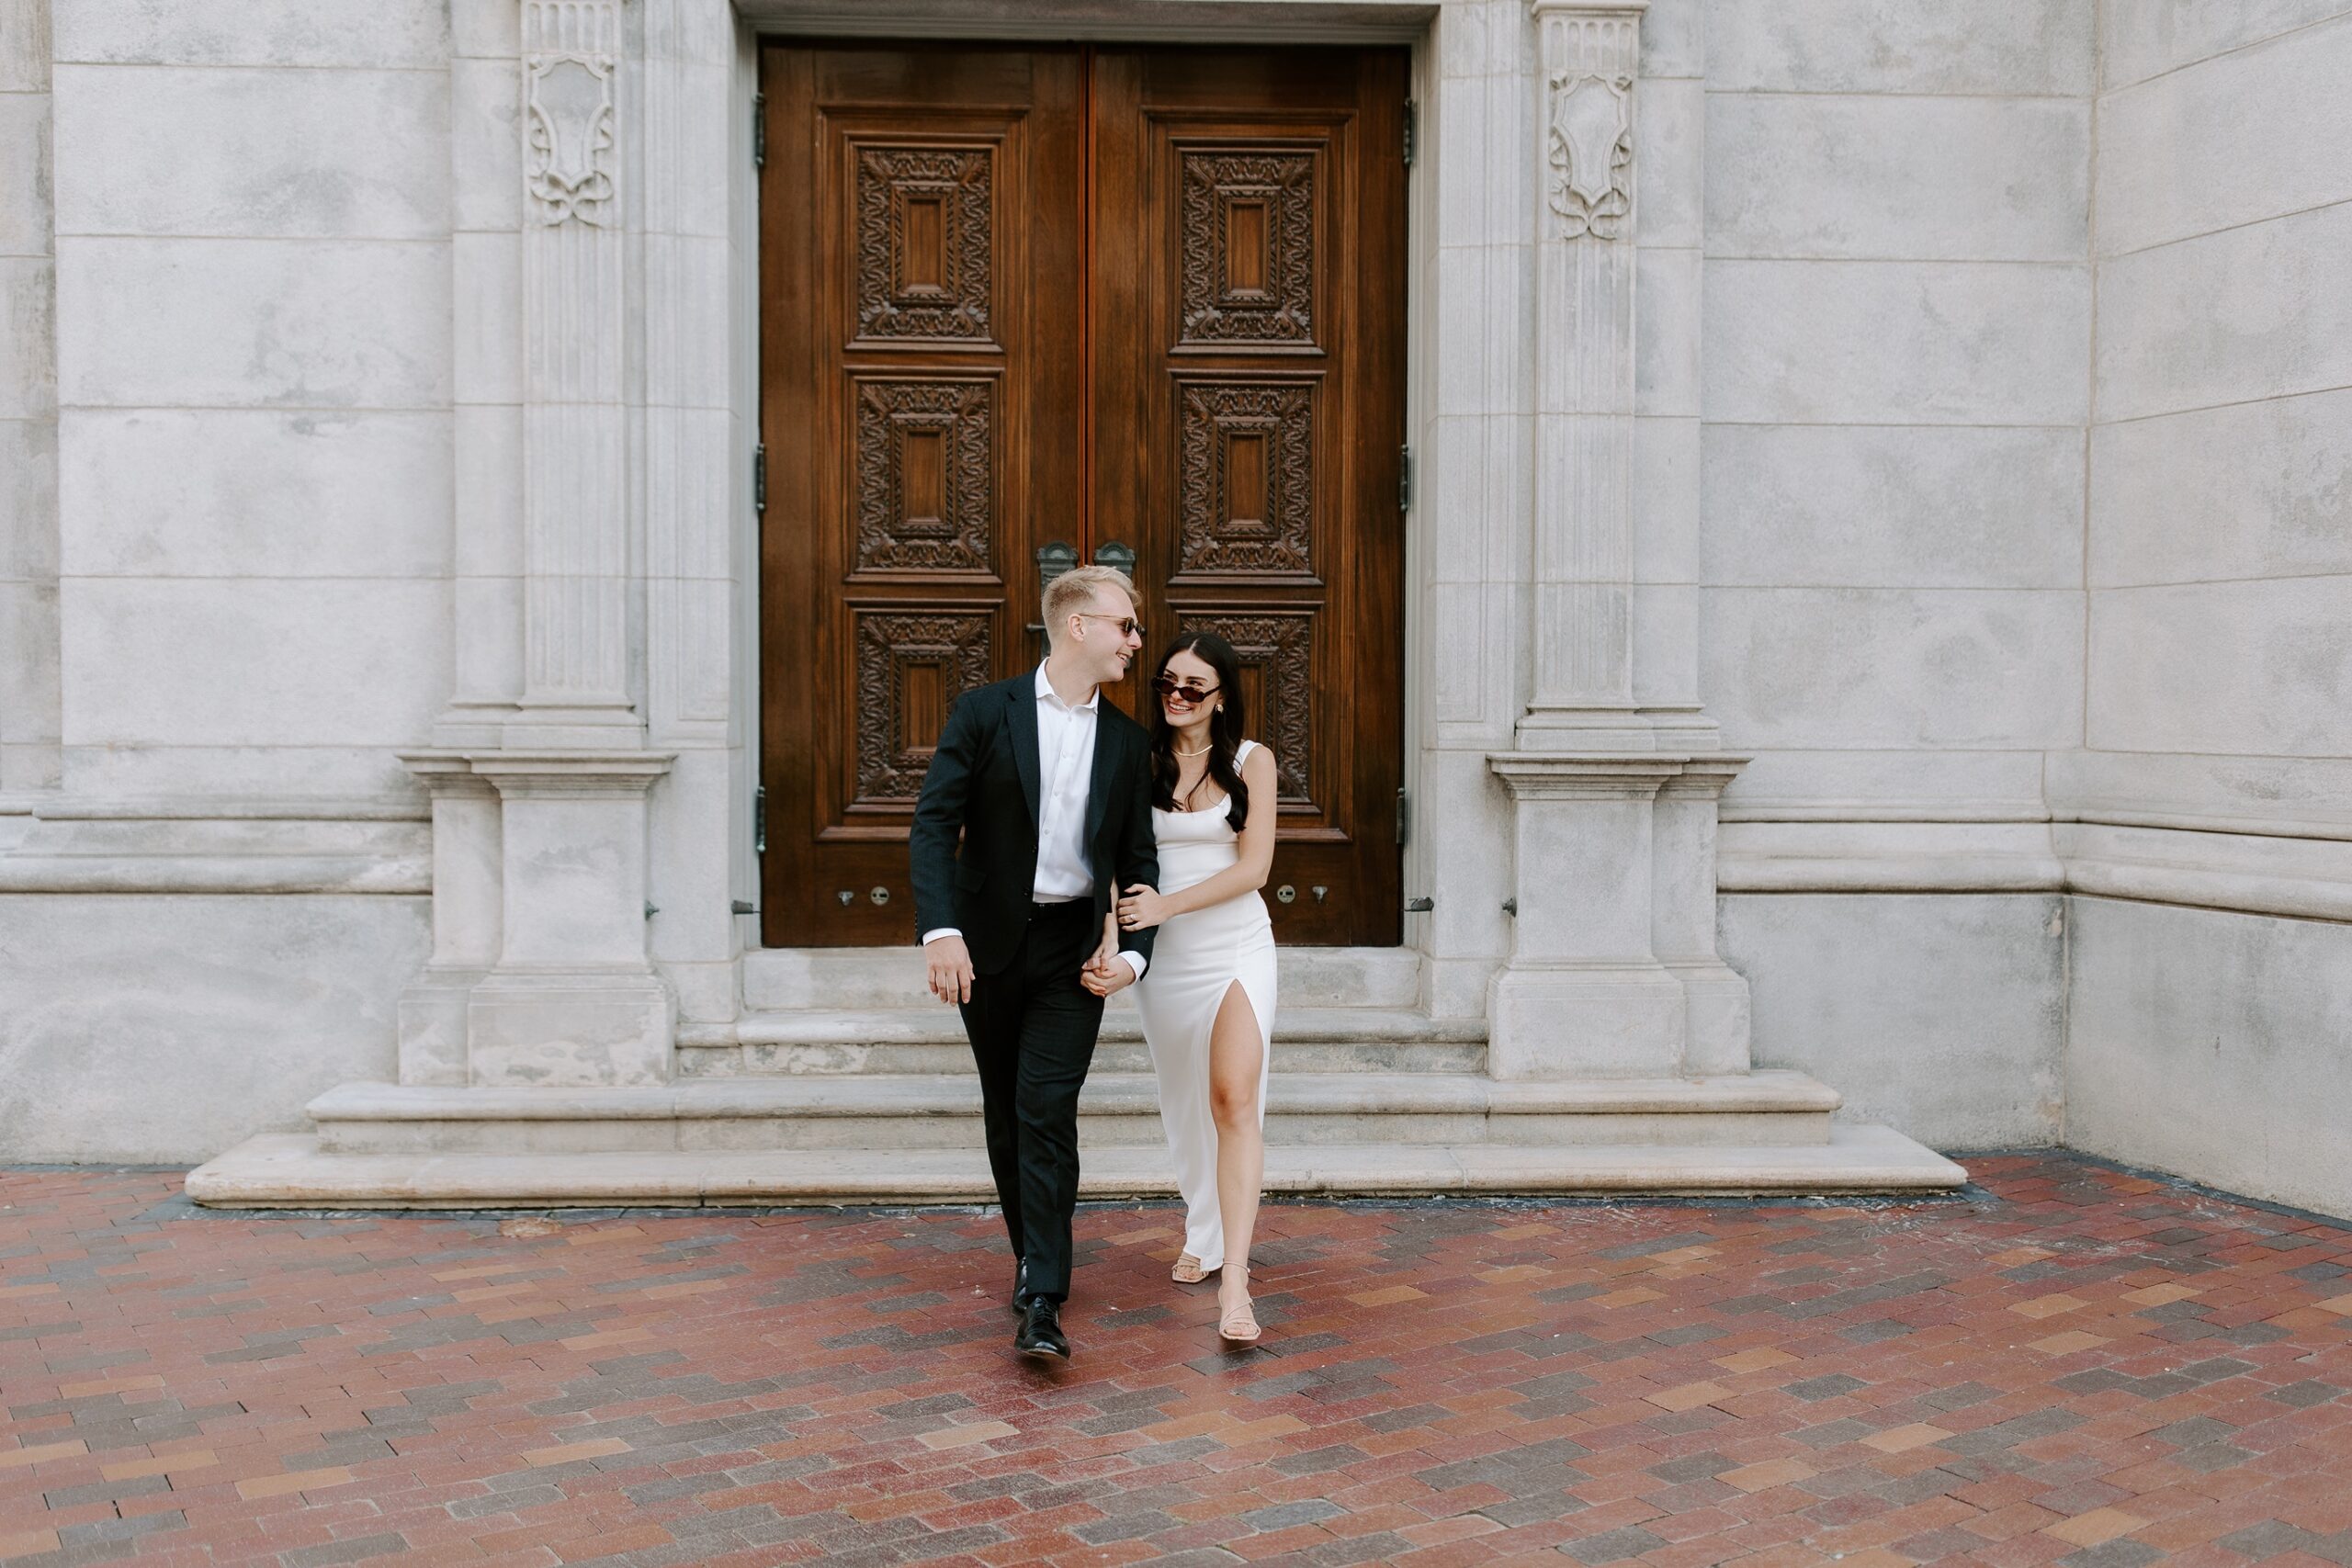 Bride and groom walking in Boston while wearing sunglasses